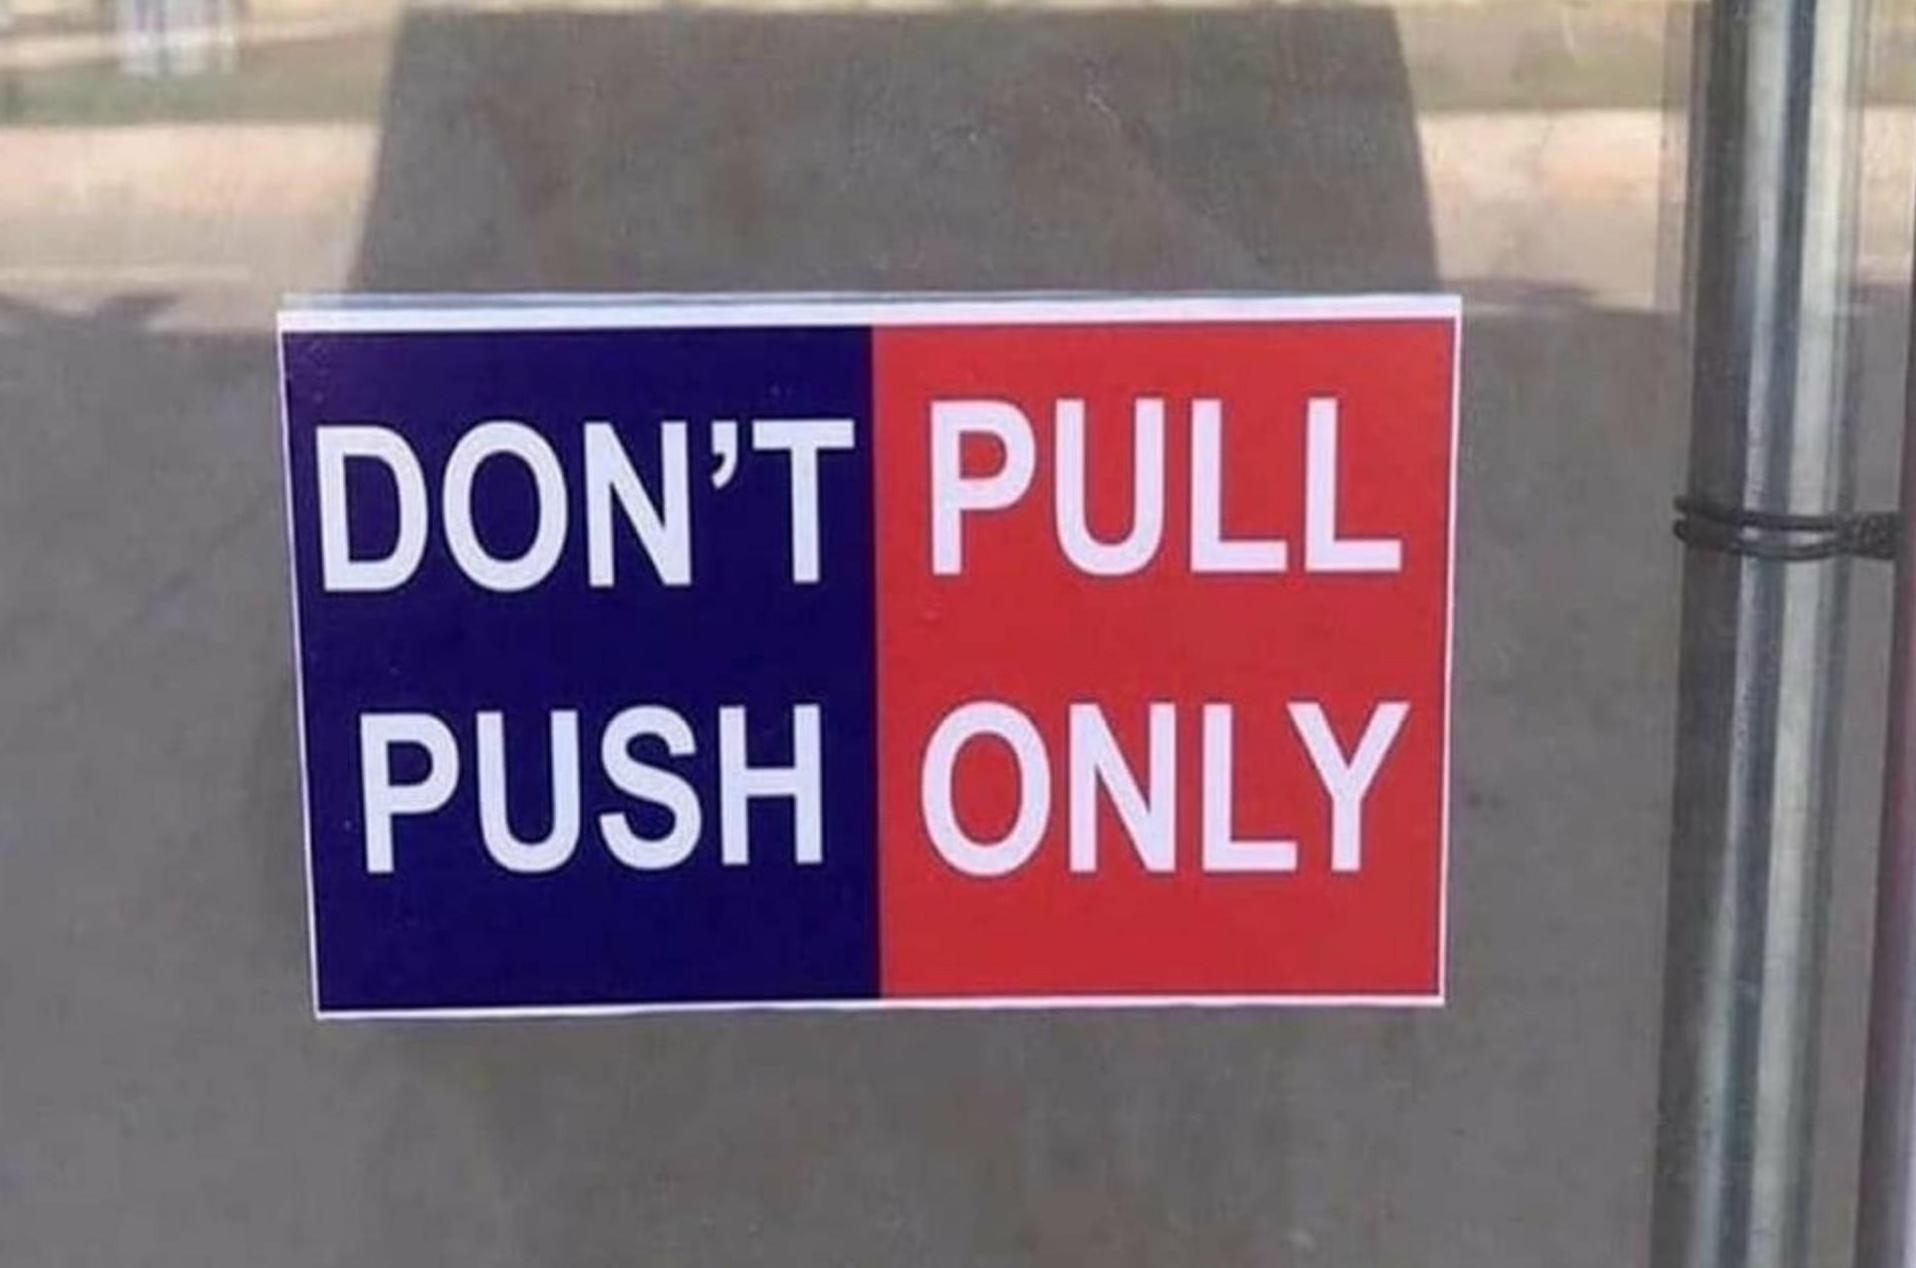 A sign hanging on a glass door that is divided vertically -- the left-hand side is colored blue and reads 'Don't Push' with the words stacked on top of one another. The right-hand side is colored red and reads 'Pull Only' with the words stacked on top of one another. However, when the sign is read left to right, top to bottom, it appears to say 'Don't Pull Push Only'.